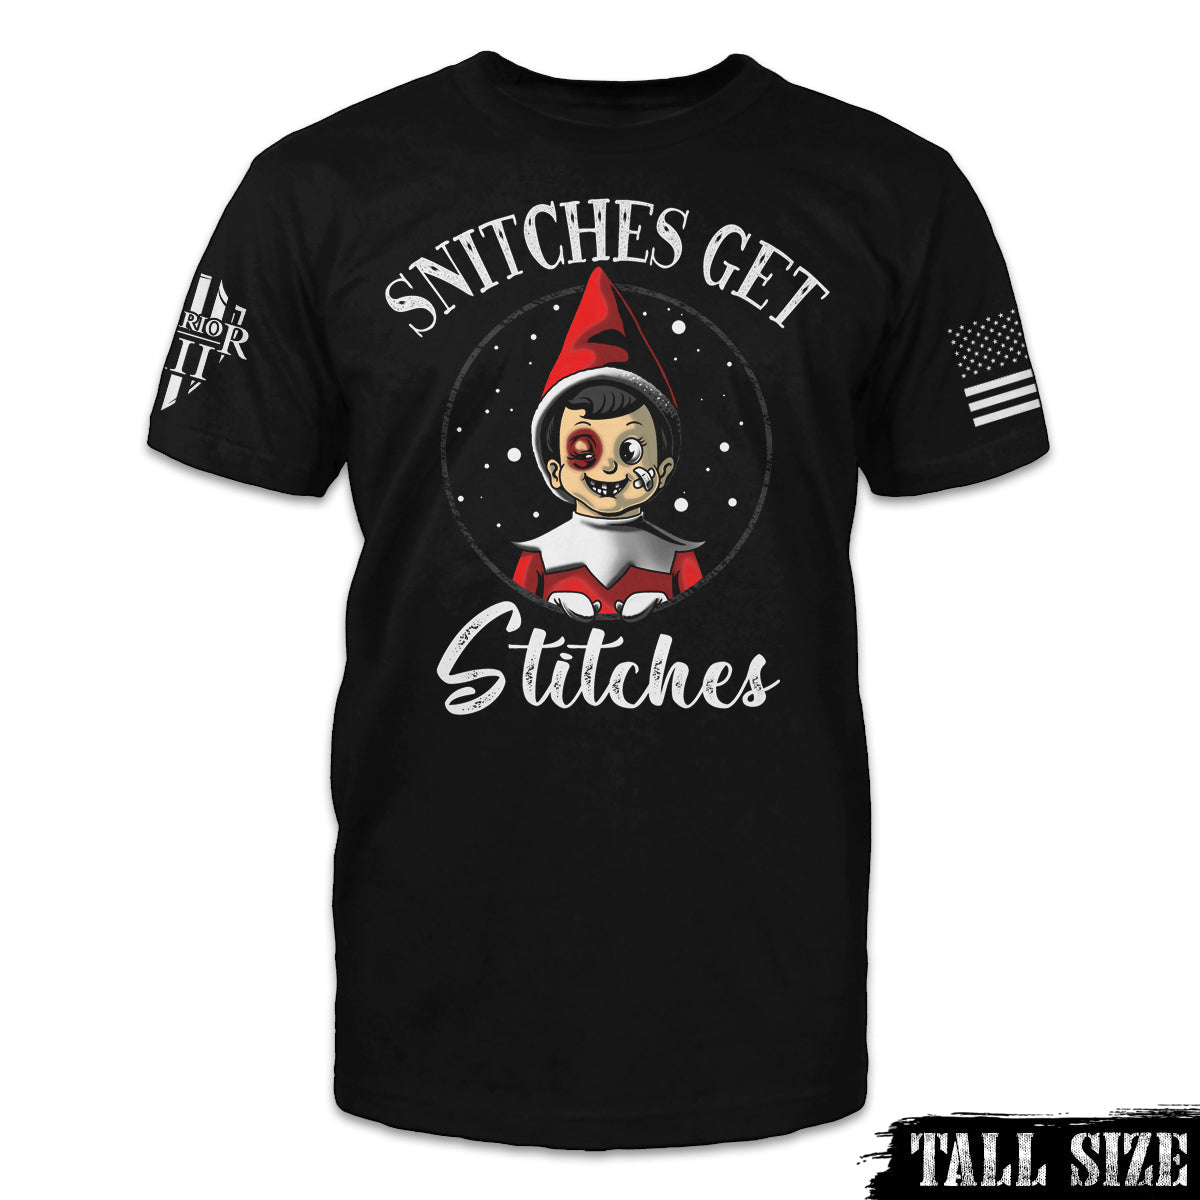 Snitches Get Stitches - Tall Size